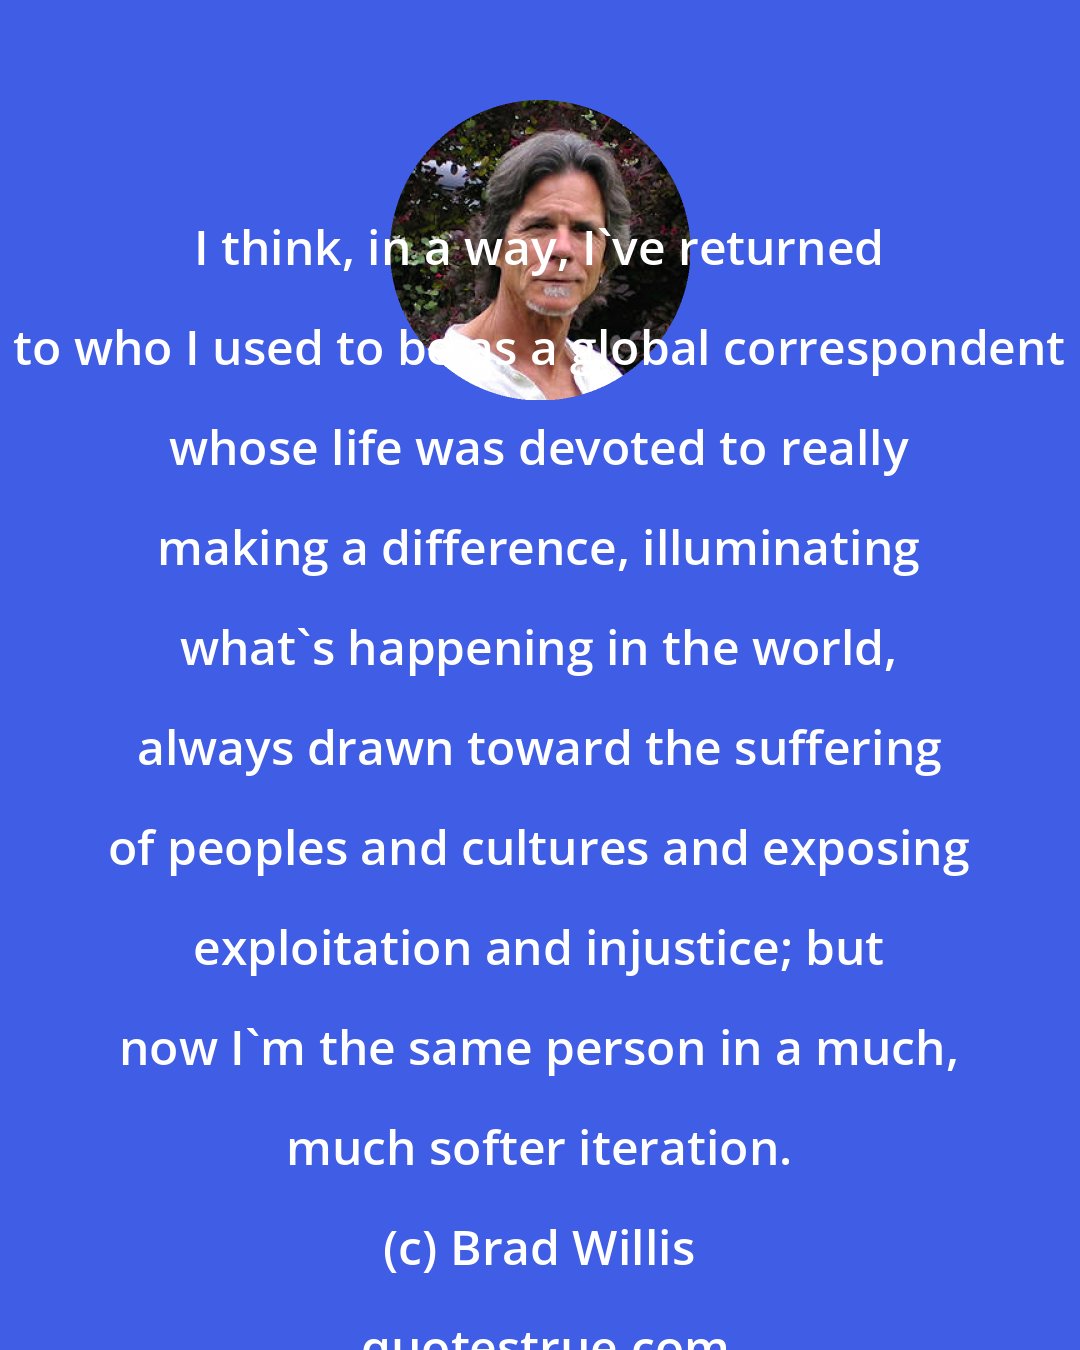 Brad Willis: I think, in a way, I've returned to who I used to be as a global correspondent whose life was devoted to really making a difference, illuminating what's happening in the world, always drawn toward the suffering of peoples and cultures and exposing exploitation and injustice; but now I'm the same person in a much, much softer iteration.